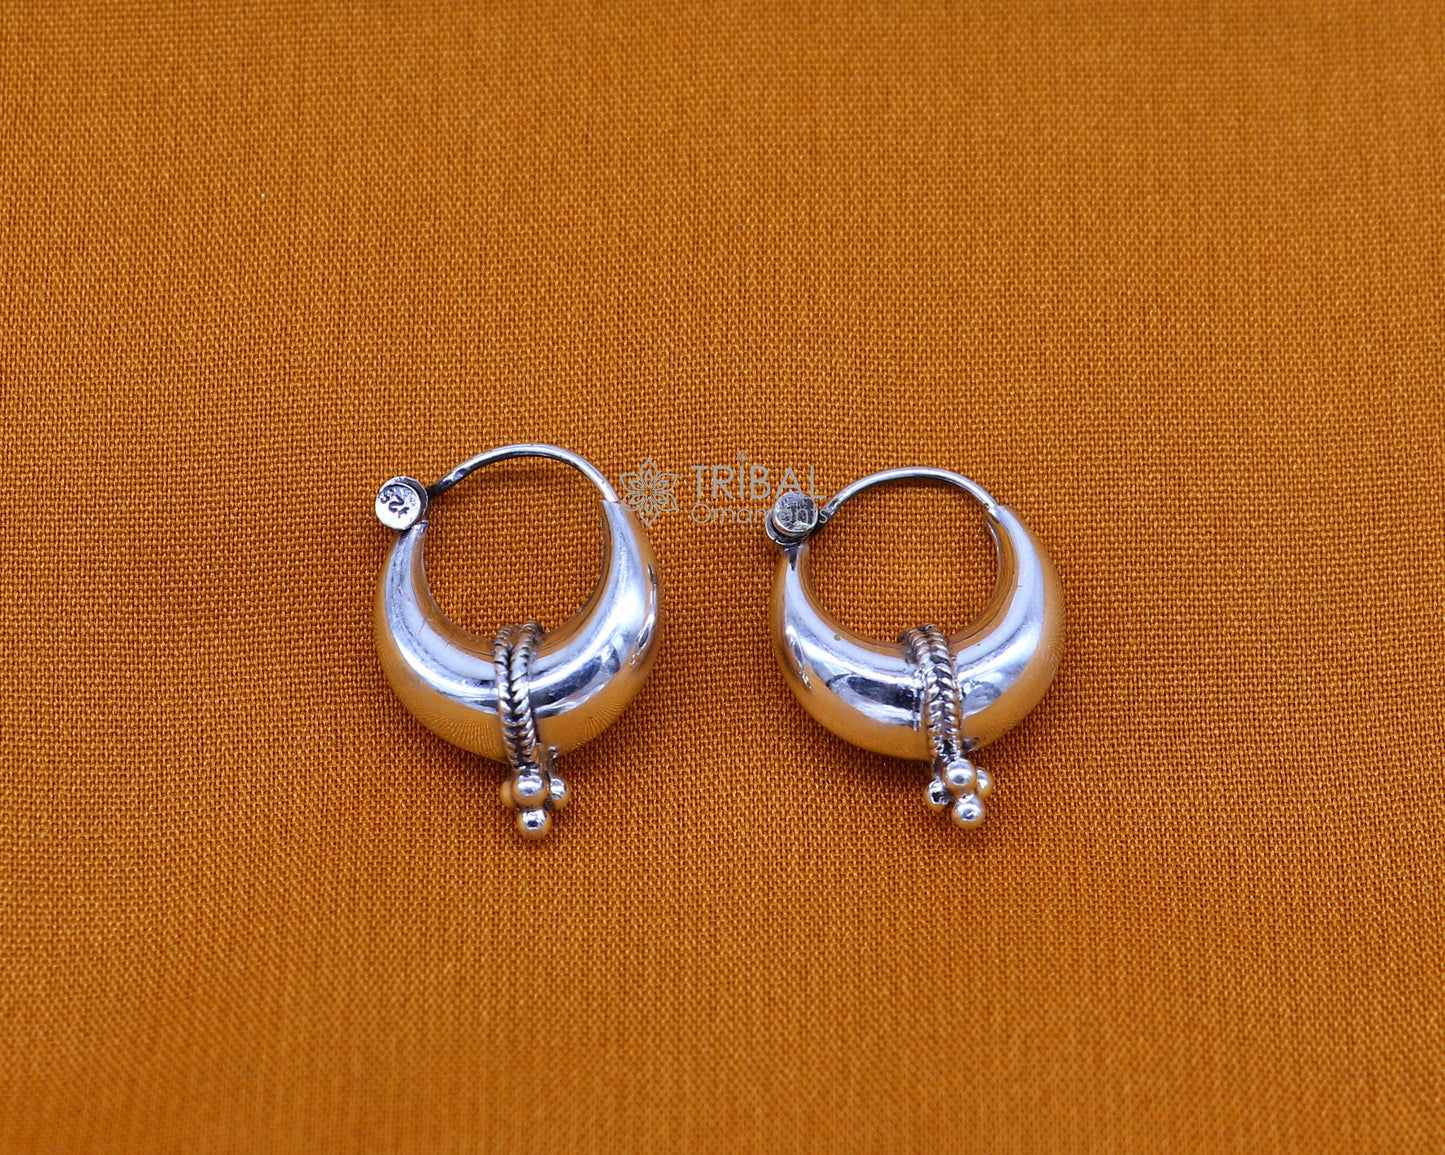 Exclusive 925 sterling silver Handmade vintage ethnic style small hoops earrings unisex tribal stylish unique Bali jewelry India S1150 - TRIBAL ORNAMENTS